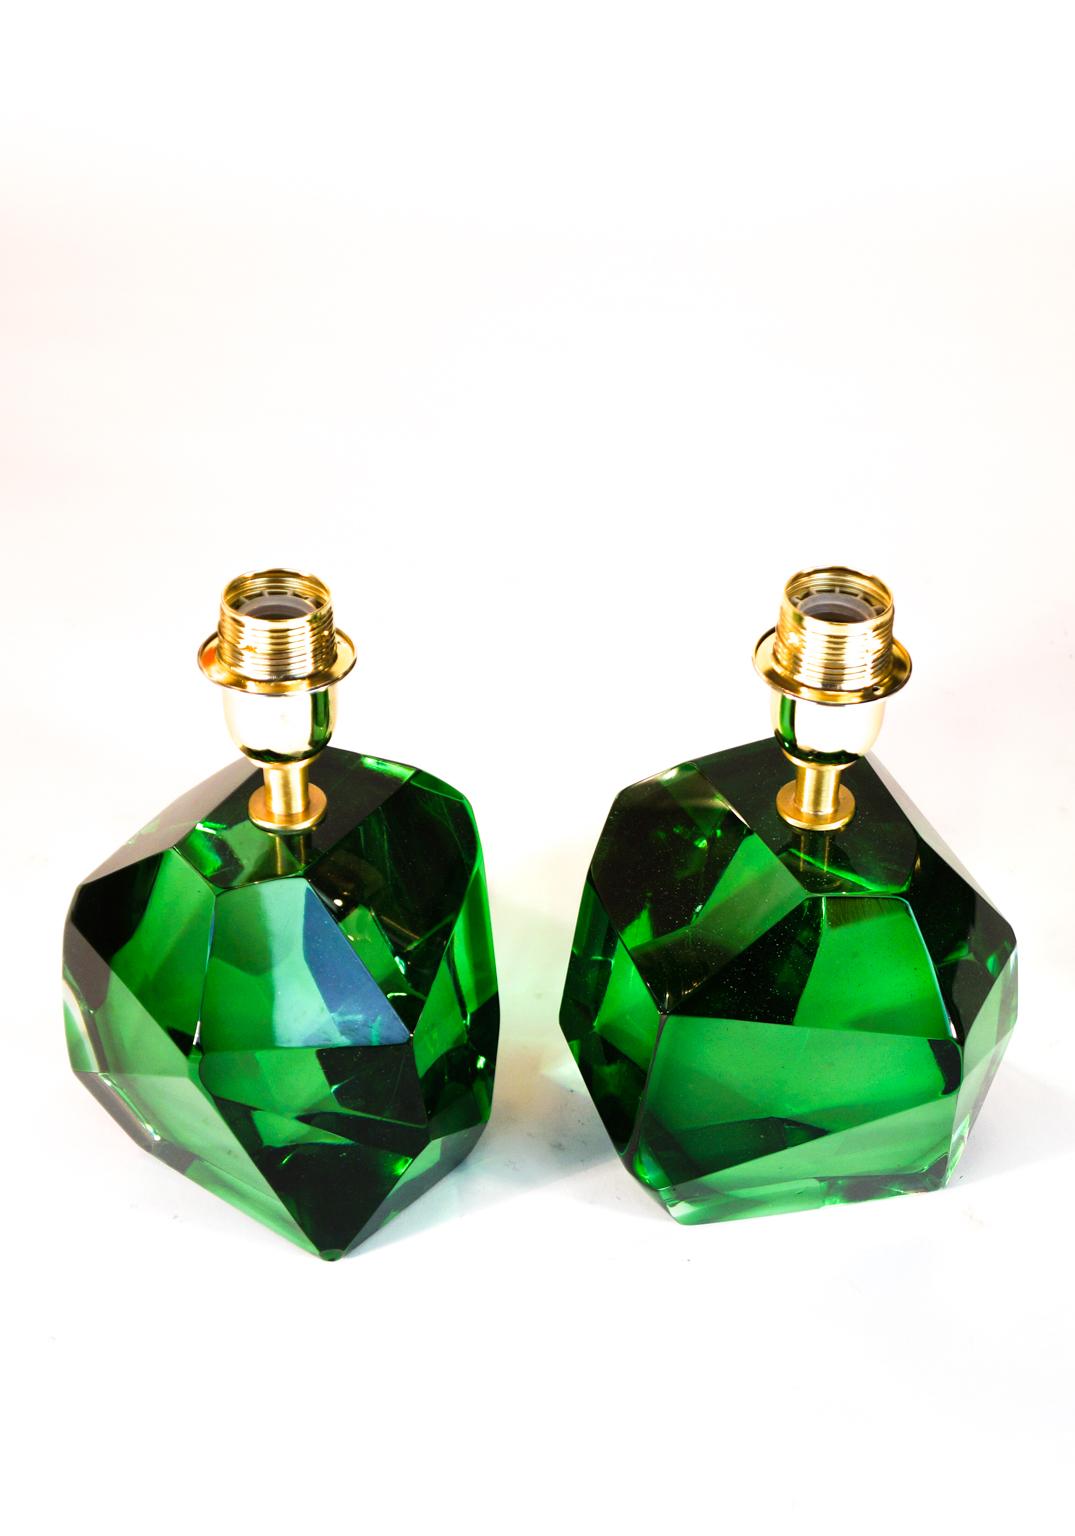 Toso Mid-Century Pair of Green Italian Murano Glass Table Lamps Faceted, 1994s For Sale 10